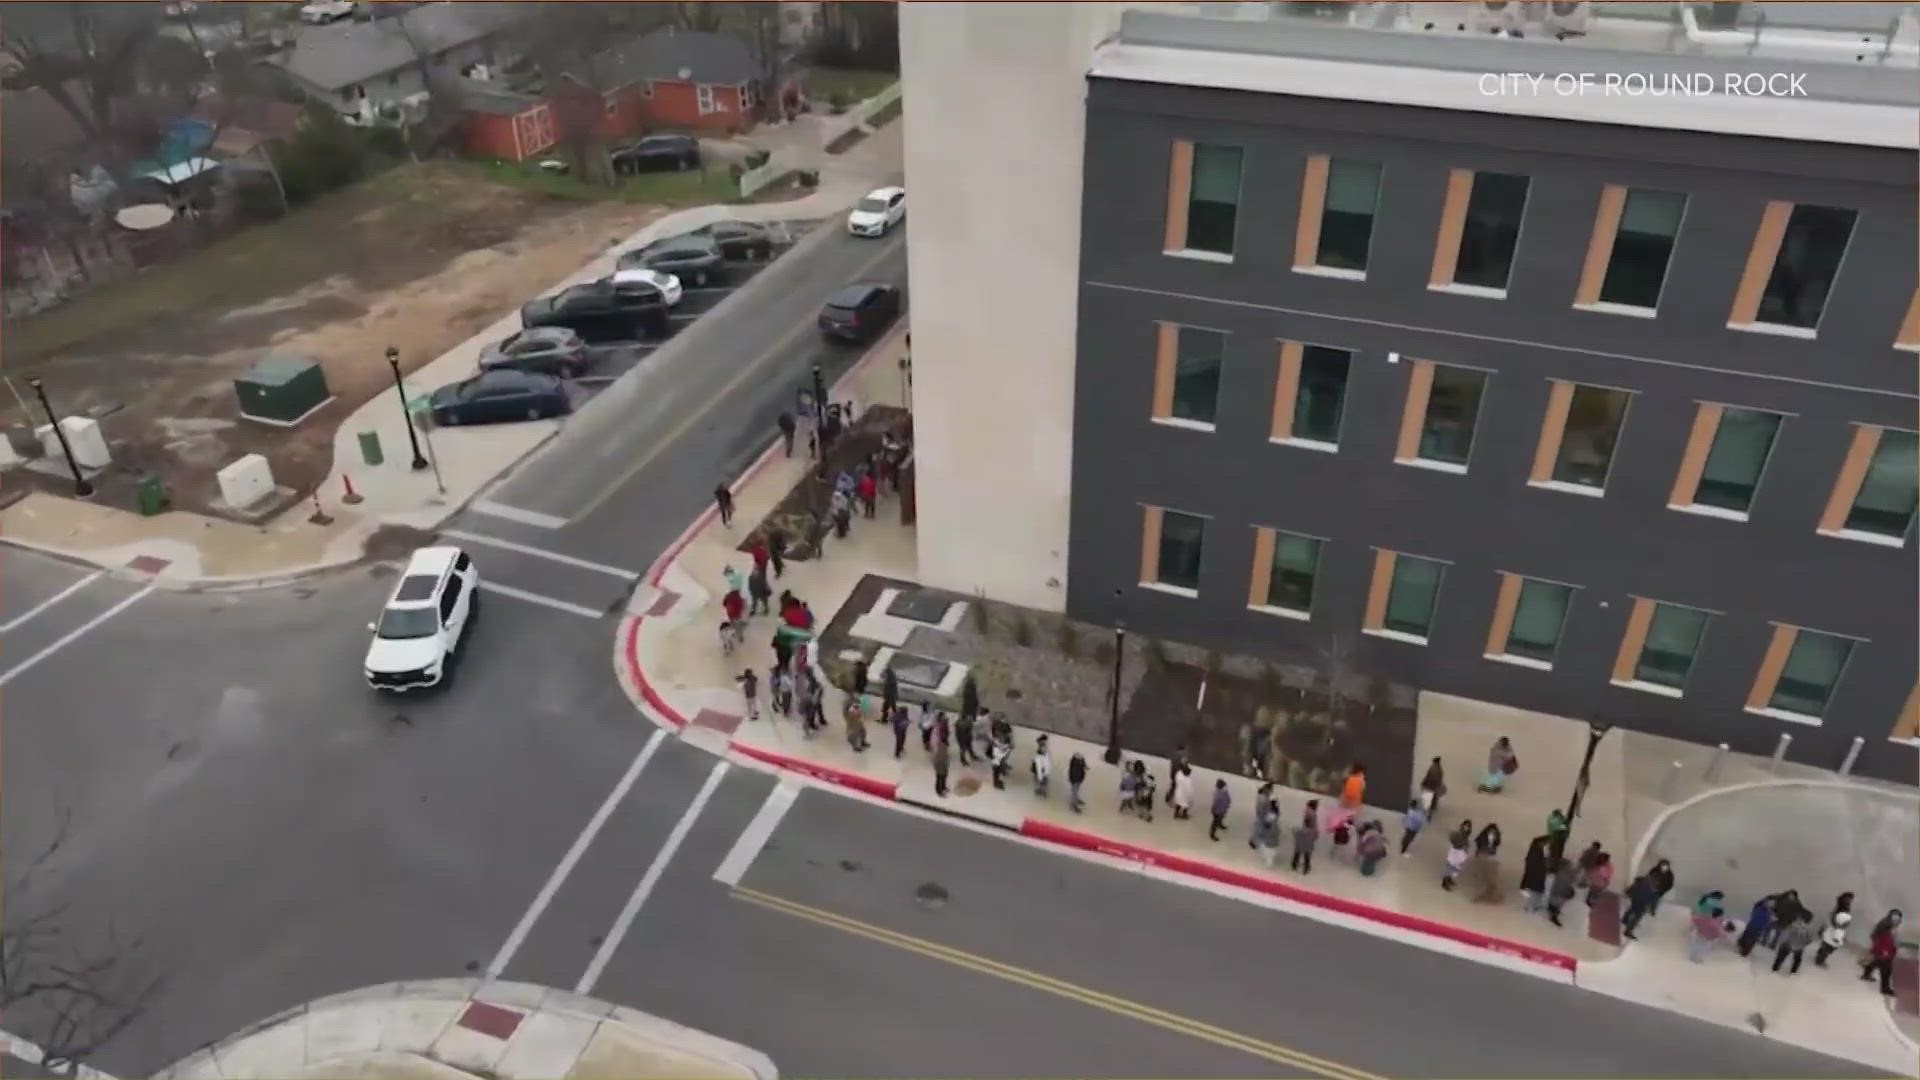 The $34 million facility opened over the weekend with a line wrapping around the building to enter!